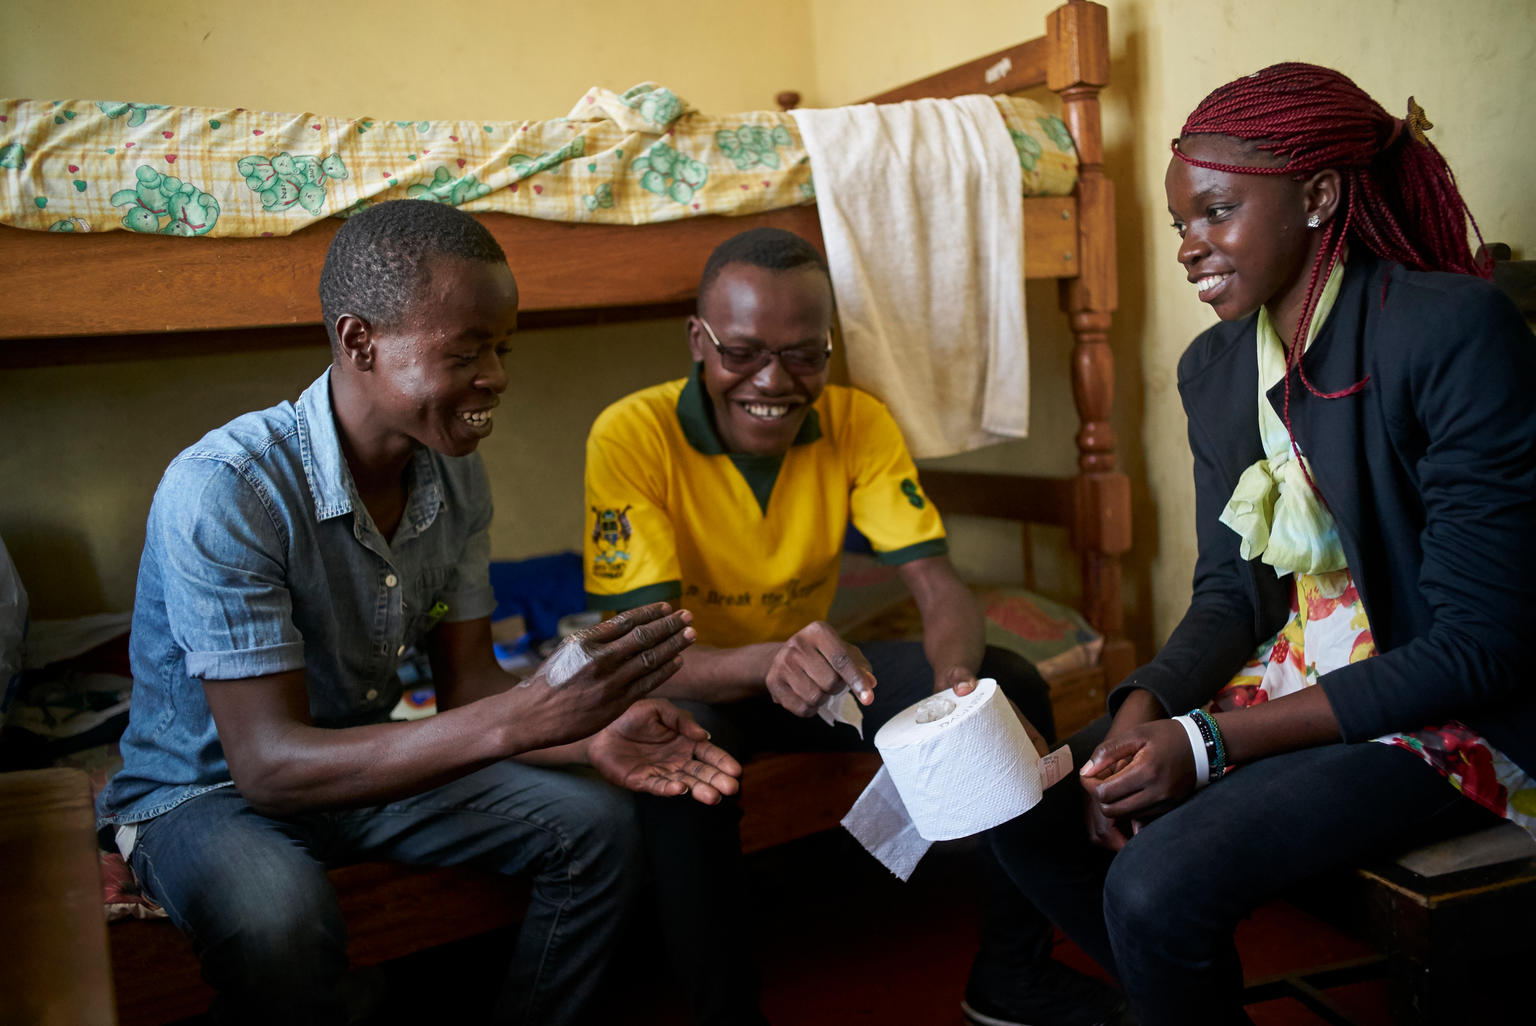 Dawwing Ouma (left), Collins Odour (middle) and Laura Adema (right) are peer counselors with Sauti Skika, a network of young people living with or are affected by HIV in Kenya. 